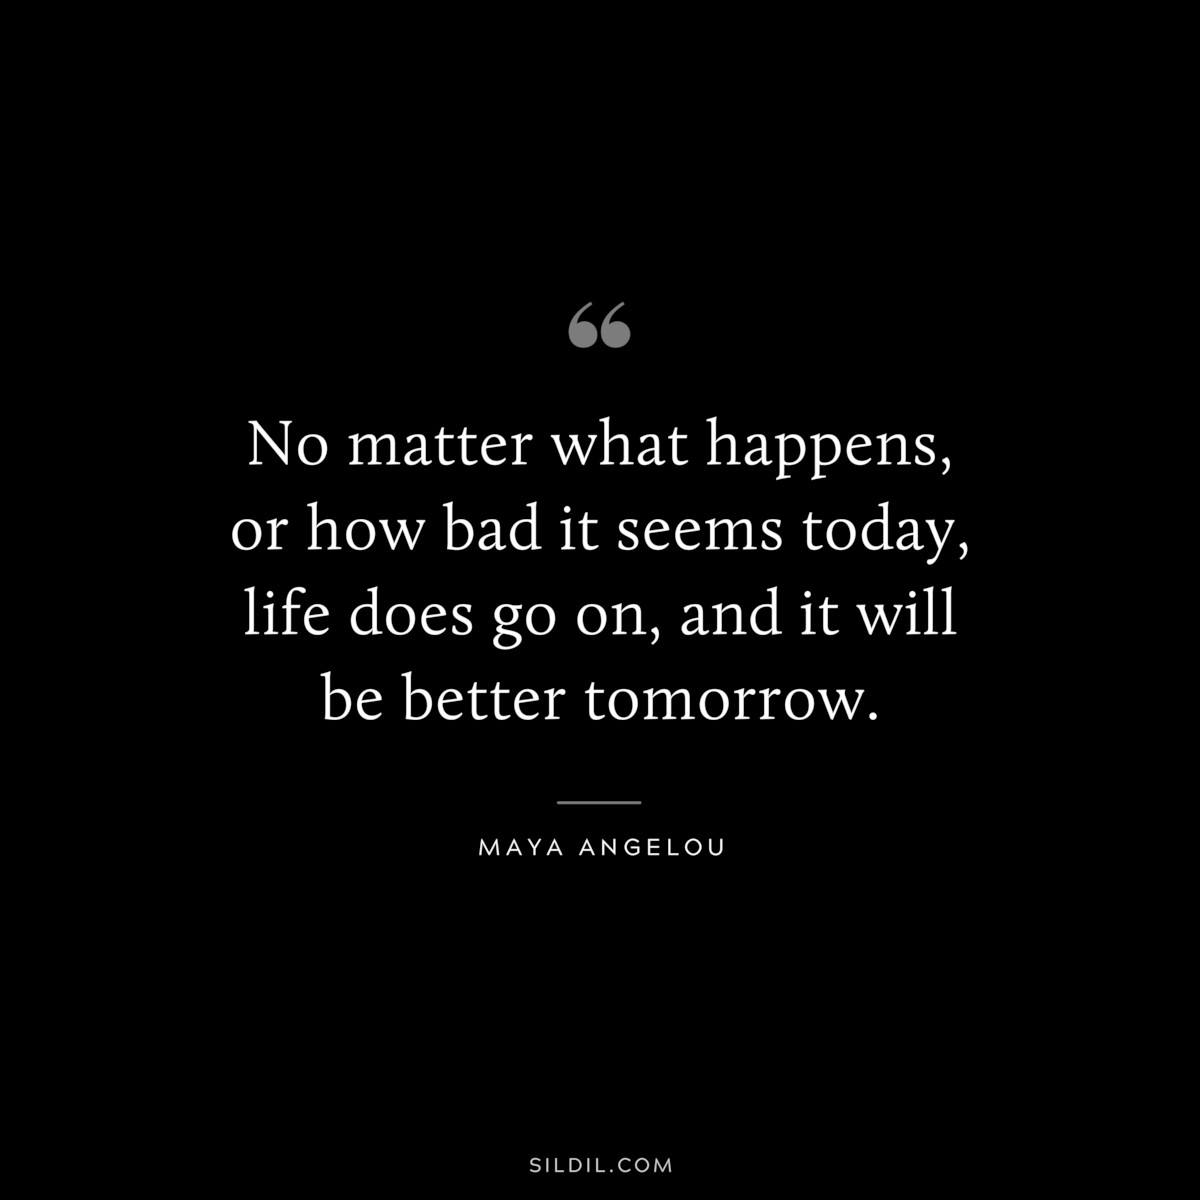 No matter what happens, or how bad it seems today, life does go on, and it will be better tomorrow. ― Maya Angelou